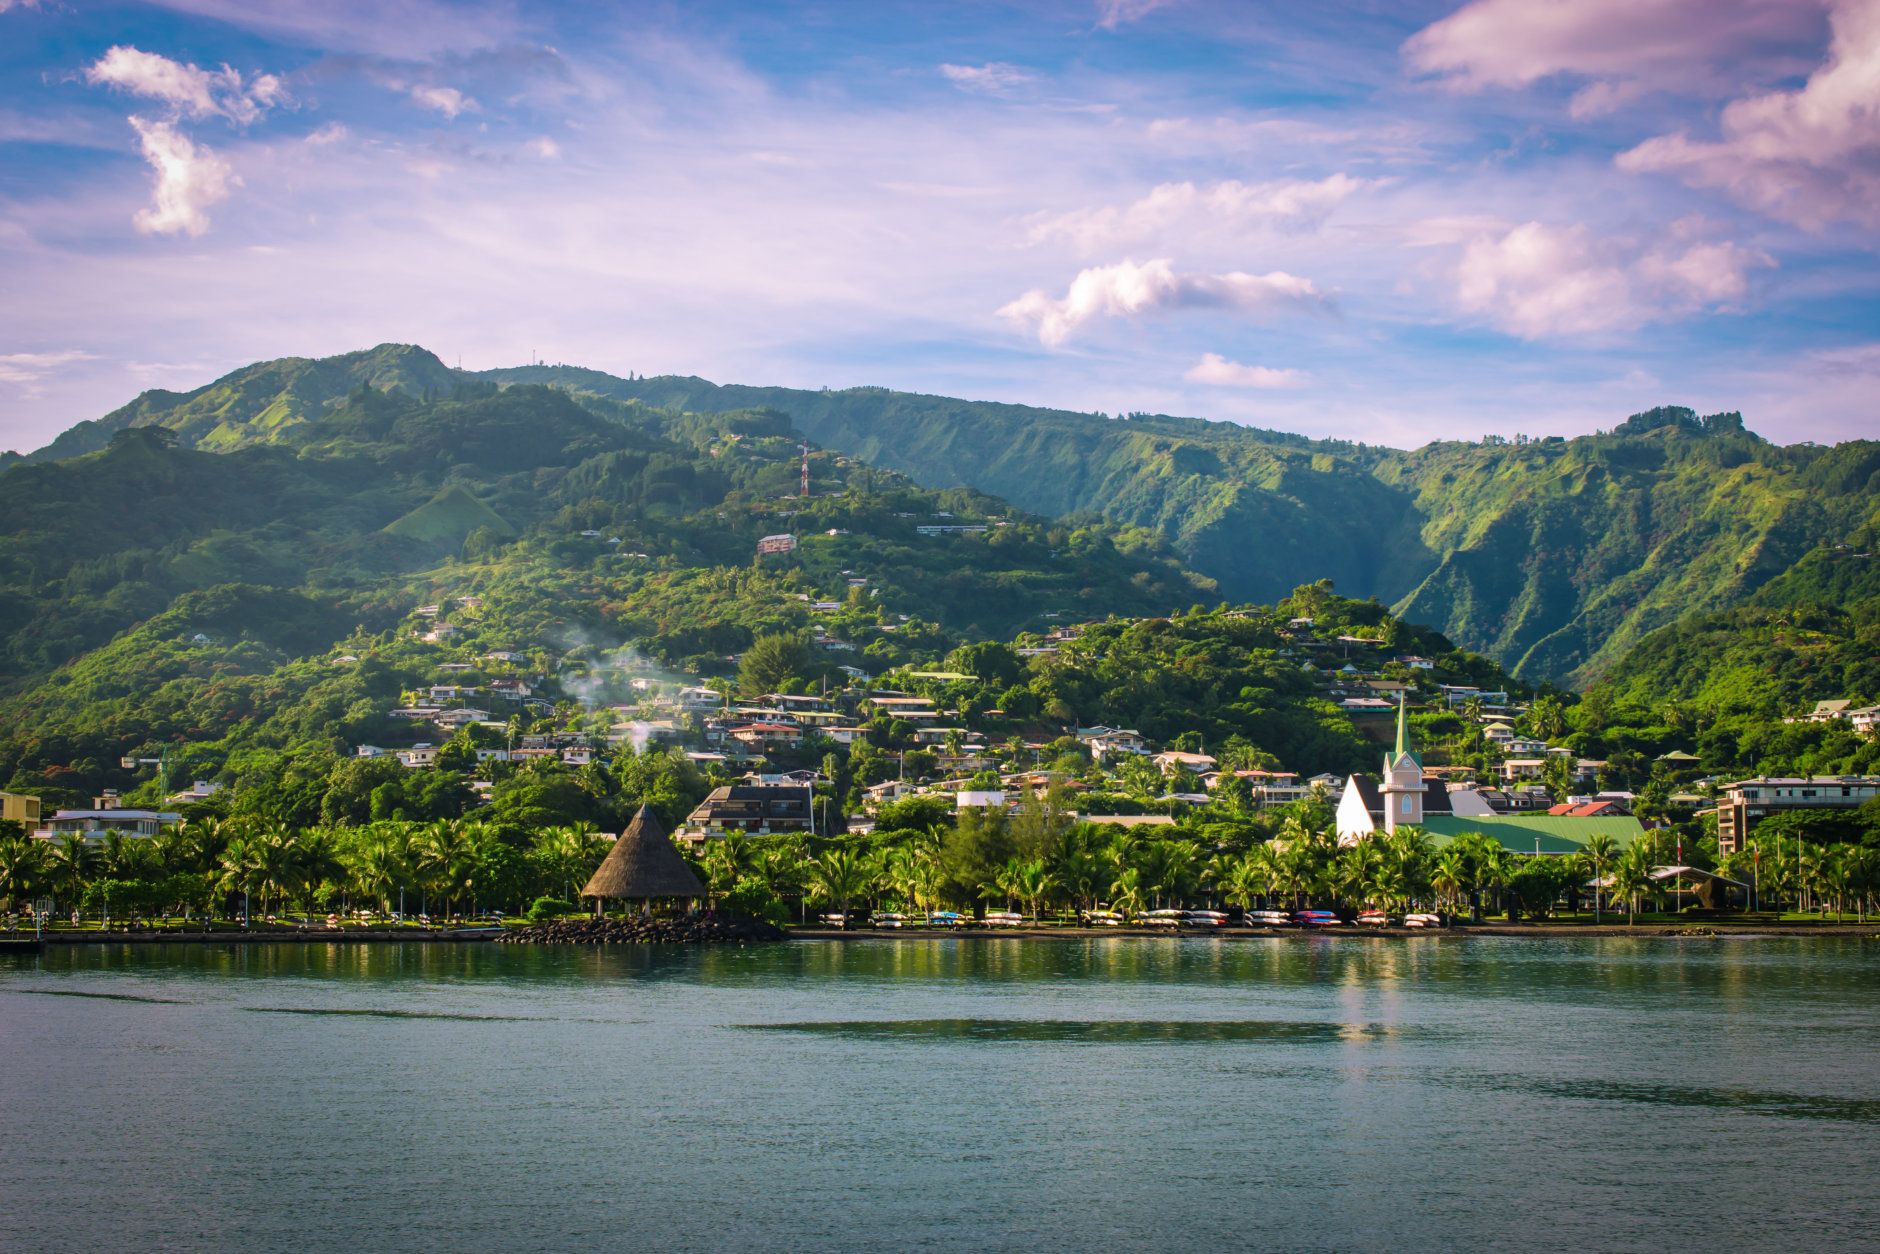 Landscape of Tahiti with mountains and village close to the port of Papeete, French Polynesia. Cruise and honeymoon destination.